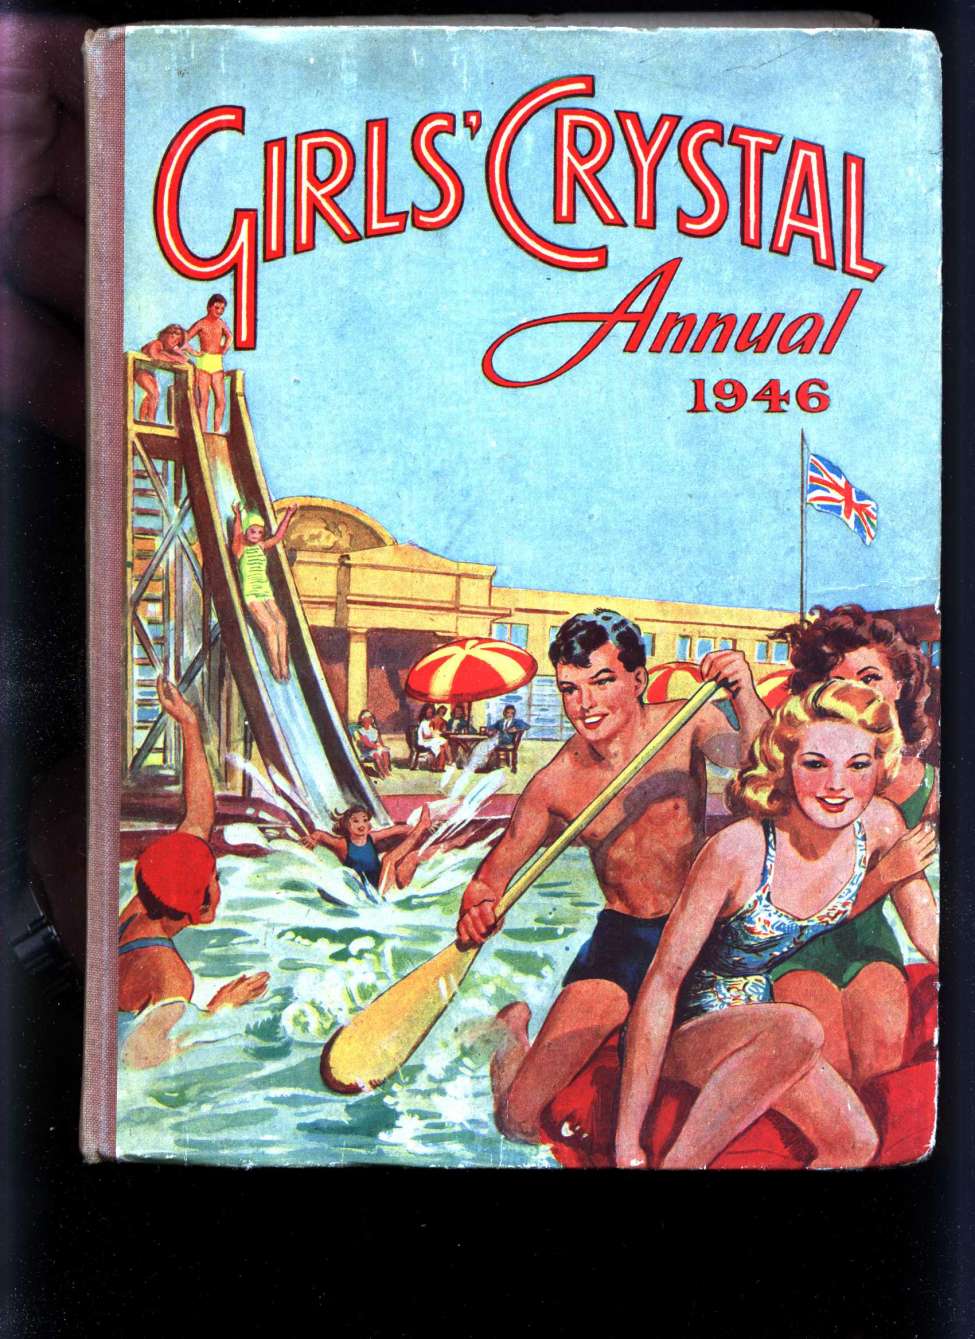 Comic Book Cover For Girls' Crystal Annual 1946